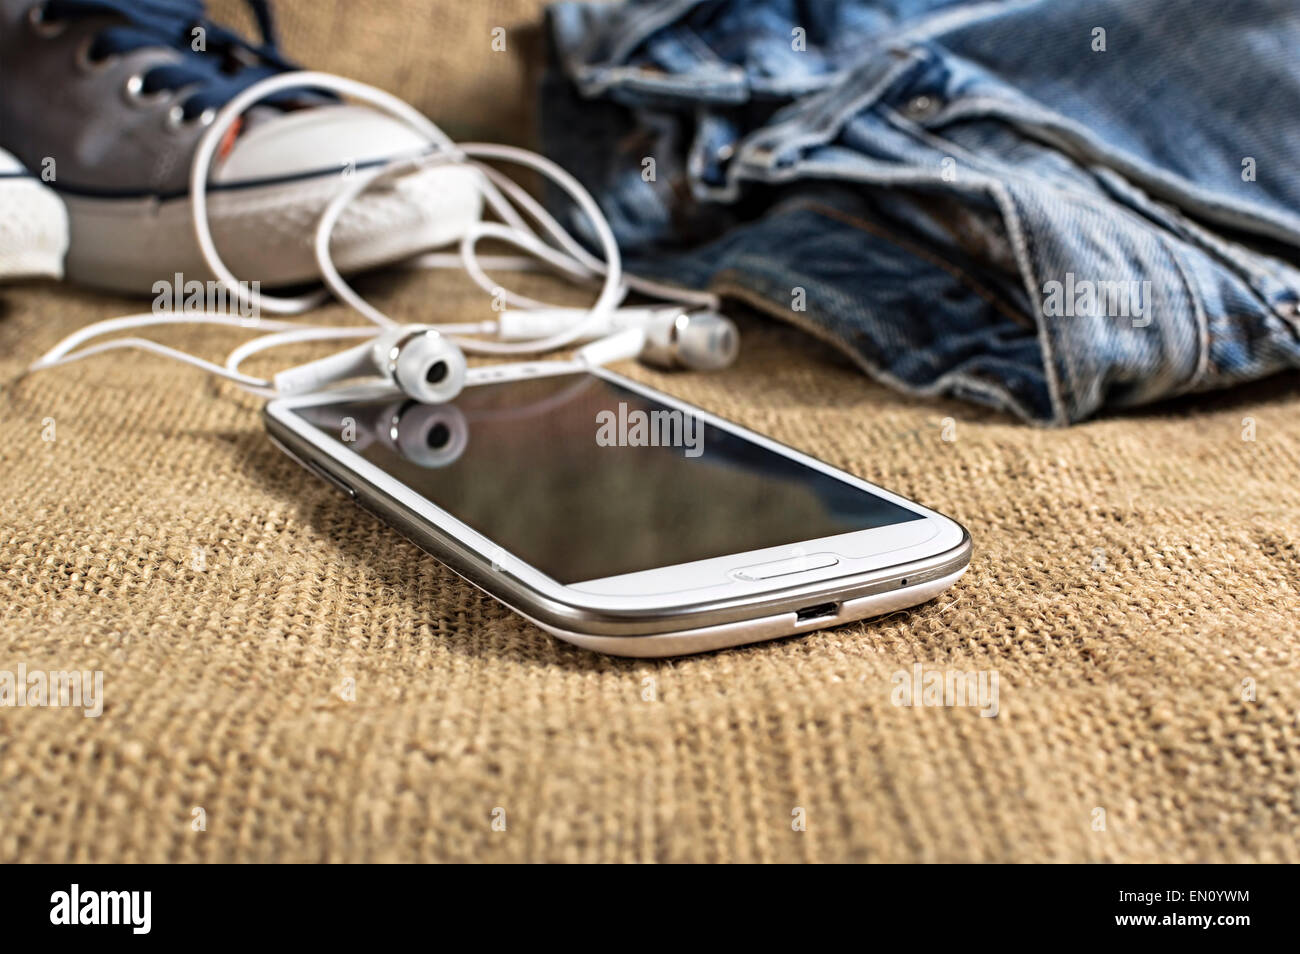 Smart phone on a table cloth with pants and sneakers. shallow depth of field. Stock Photo